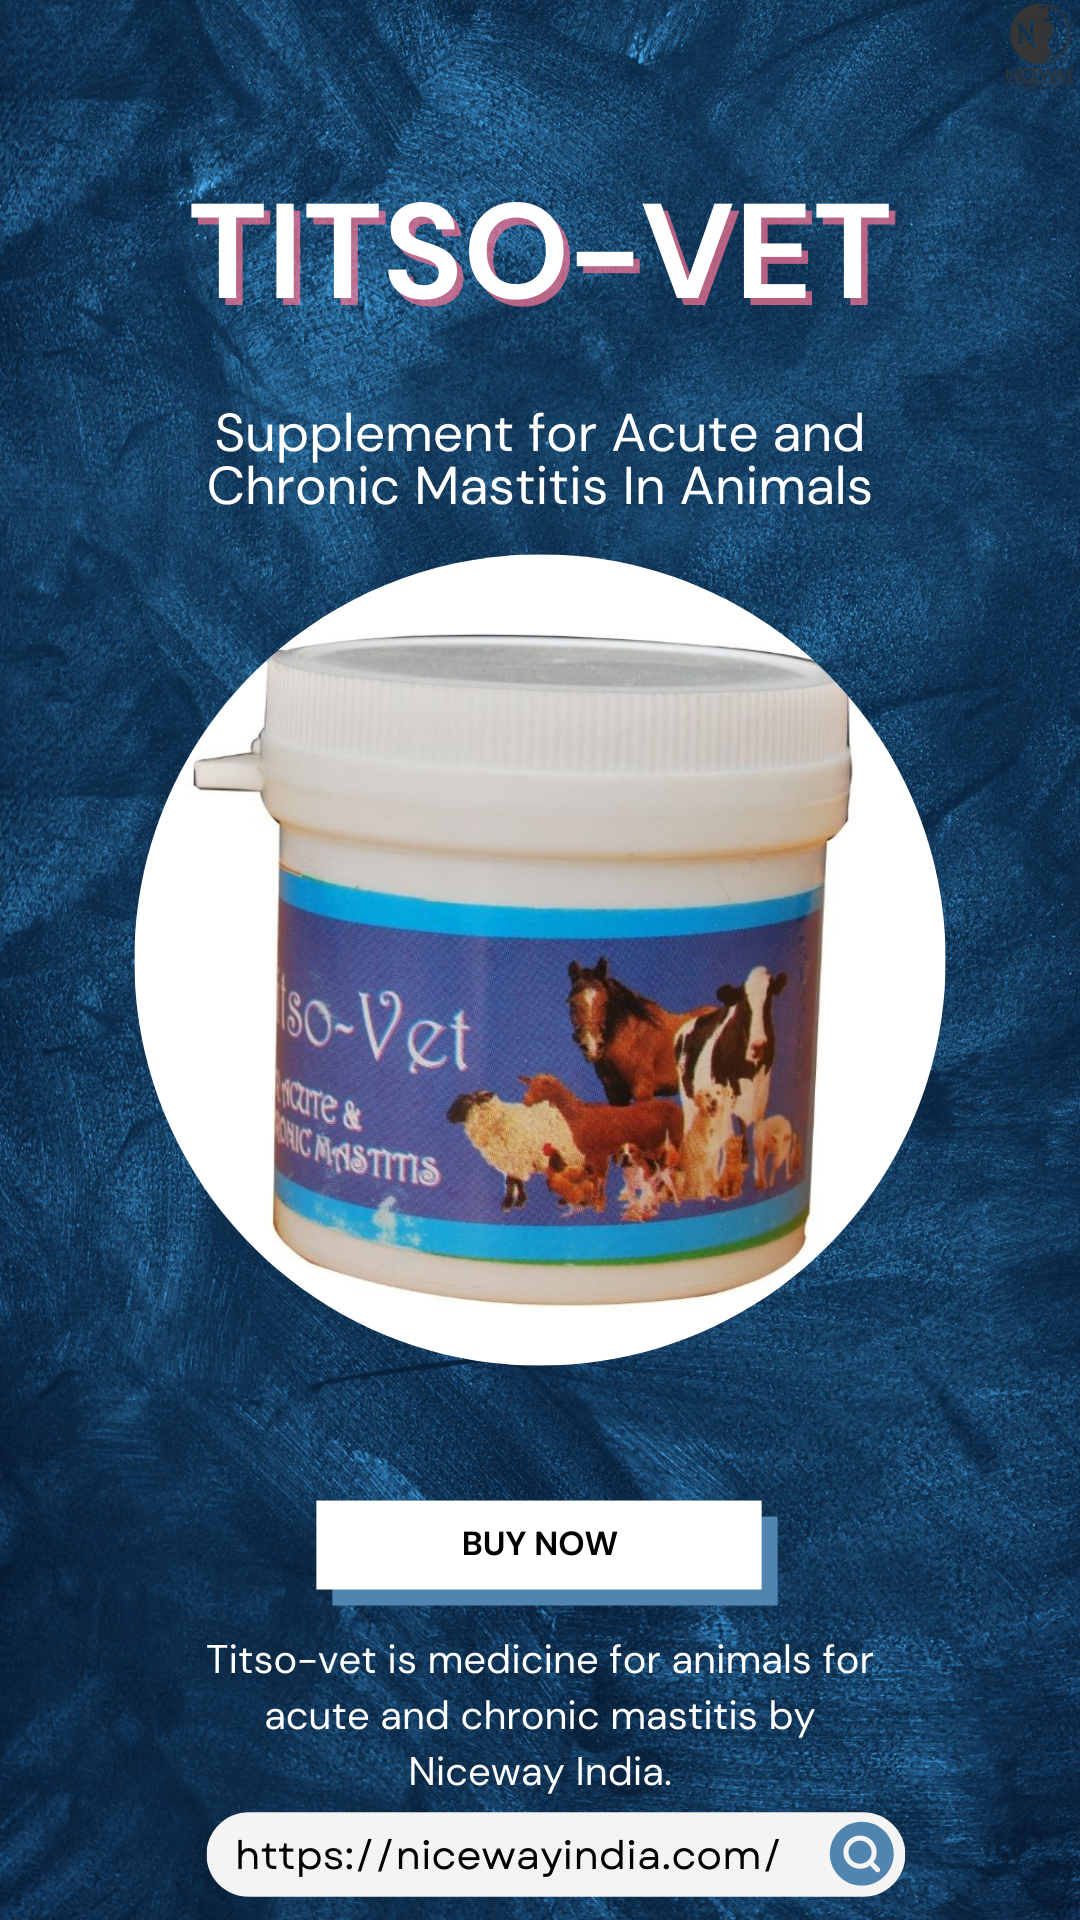 TITSO-VET

Supplement for Acute and
Chronic Mastitis In Animals

 

BUY NOW

Titso-vet is medicine for animals for
acute and chronic mastitis by
Niceway India.

https://nicewayindia.com/ ®